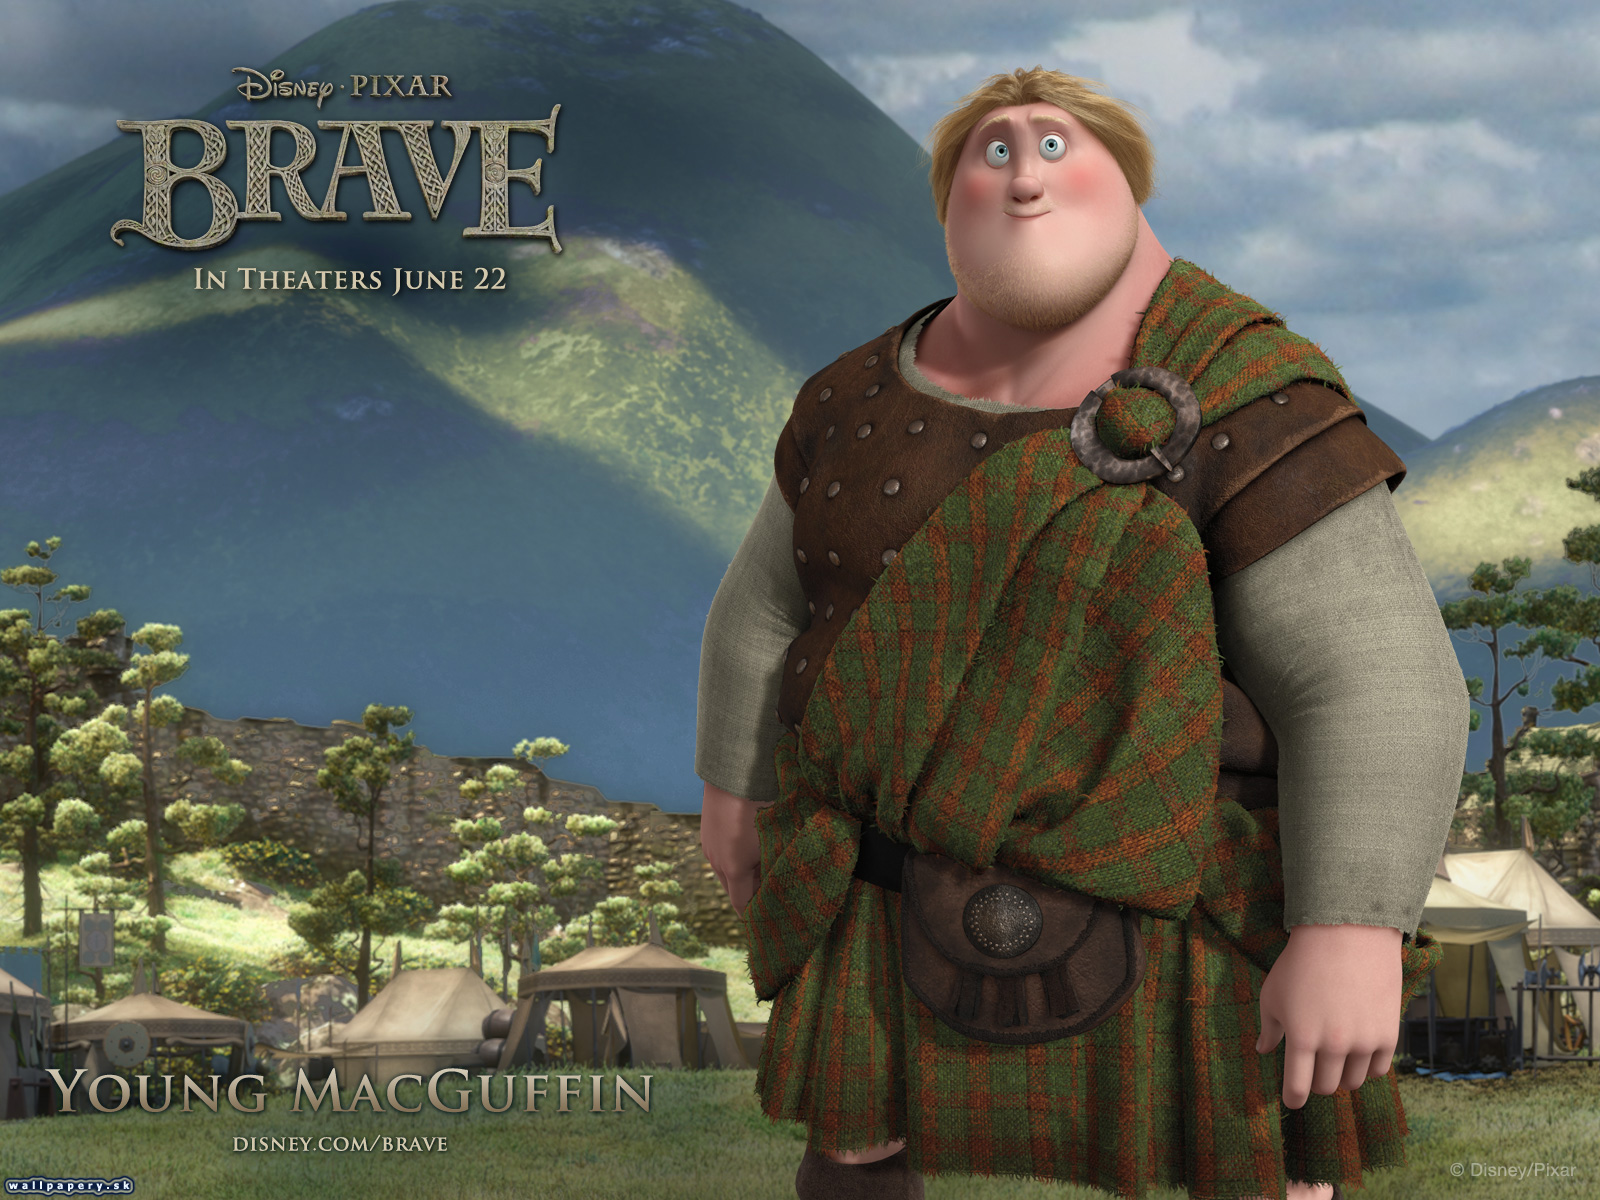 Brave: The Video Game - wallpaper 11